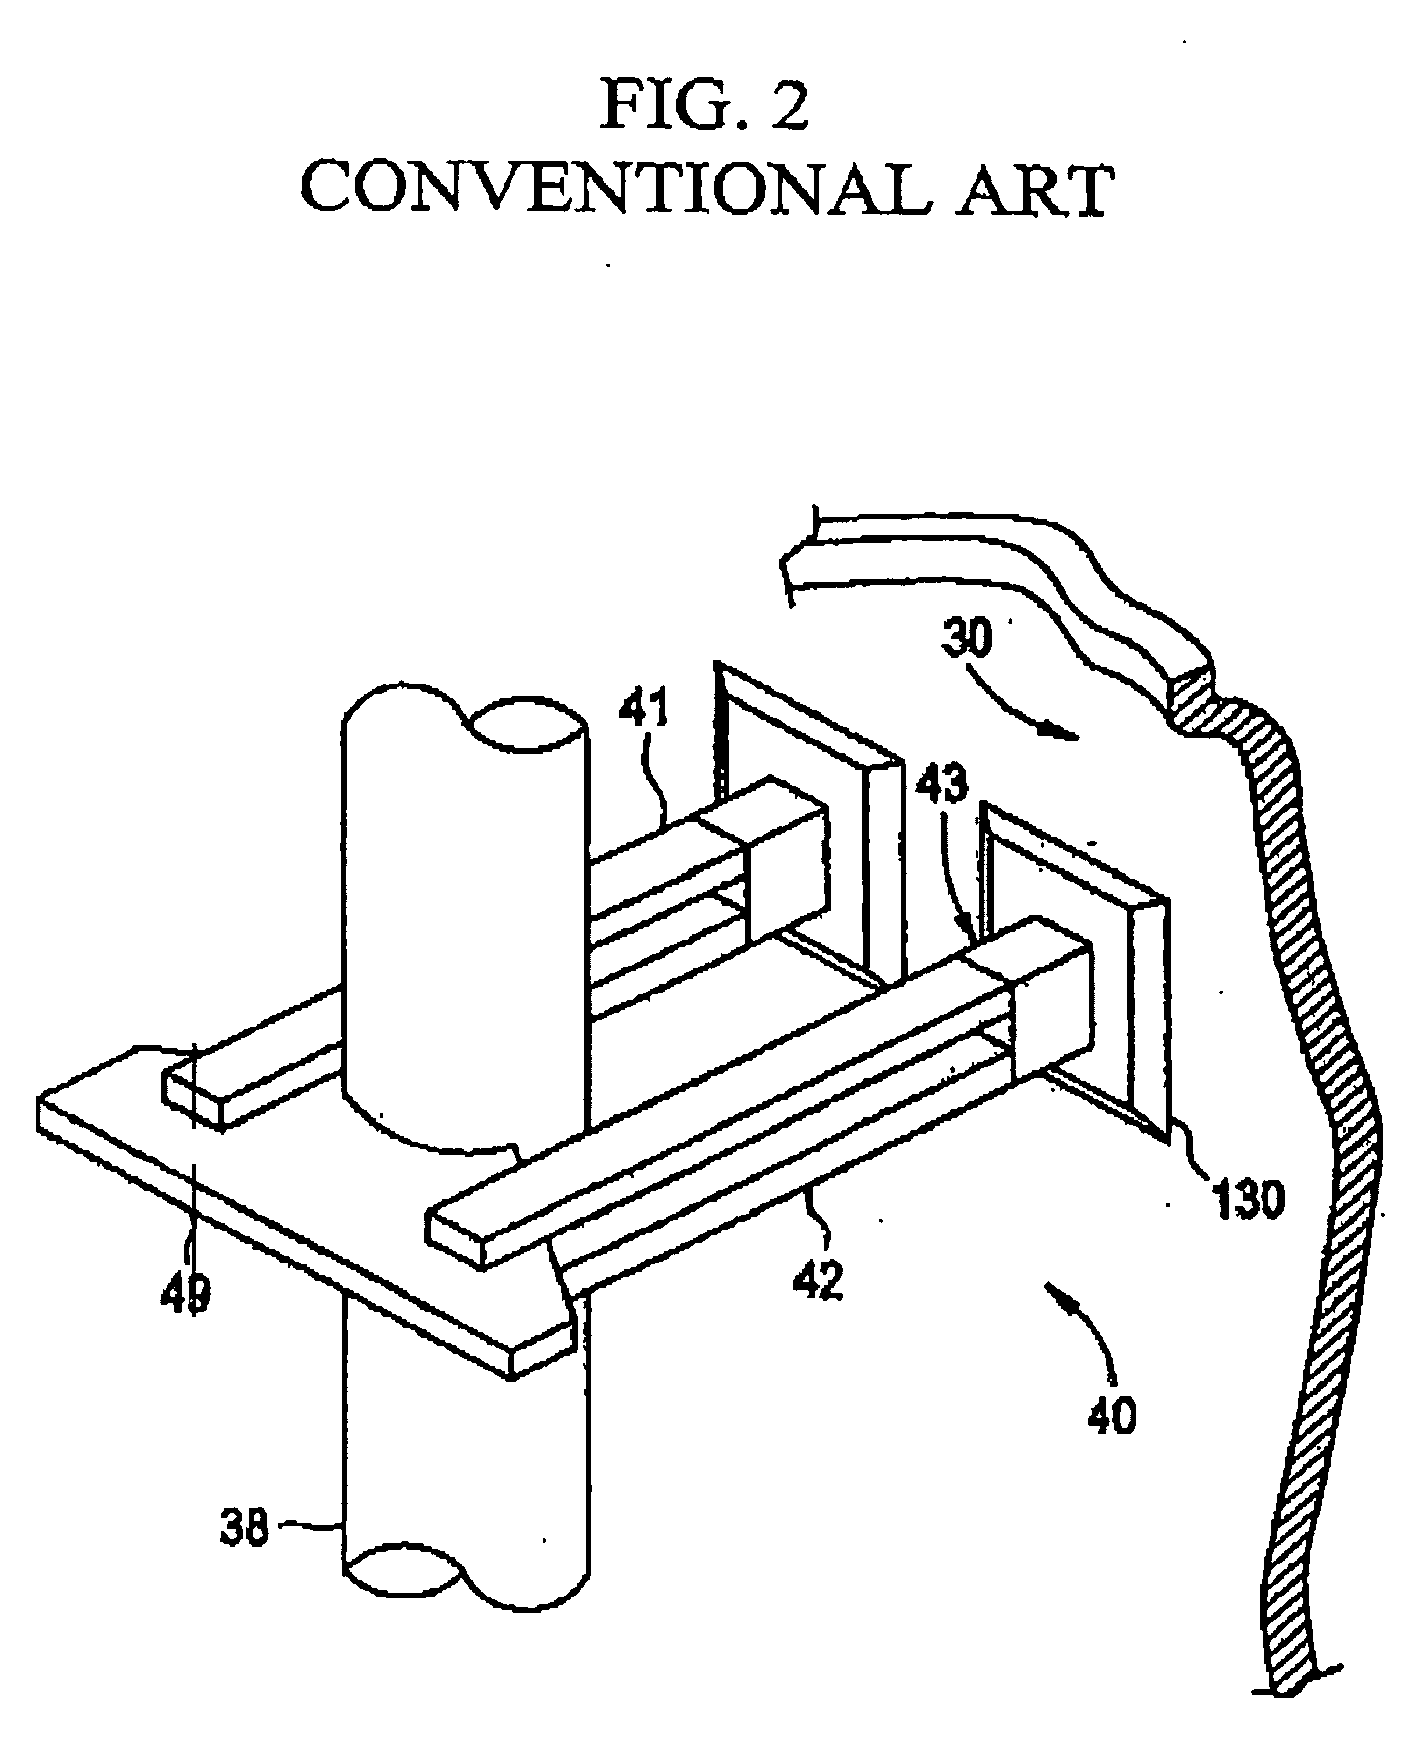 Method and apparatus for clamping a riser brace assembly in nuclear reactor